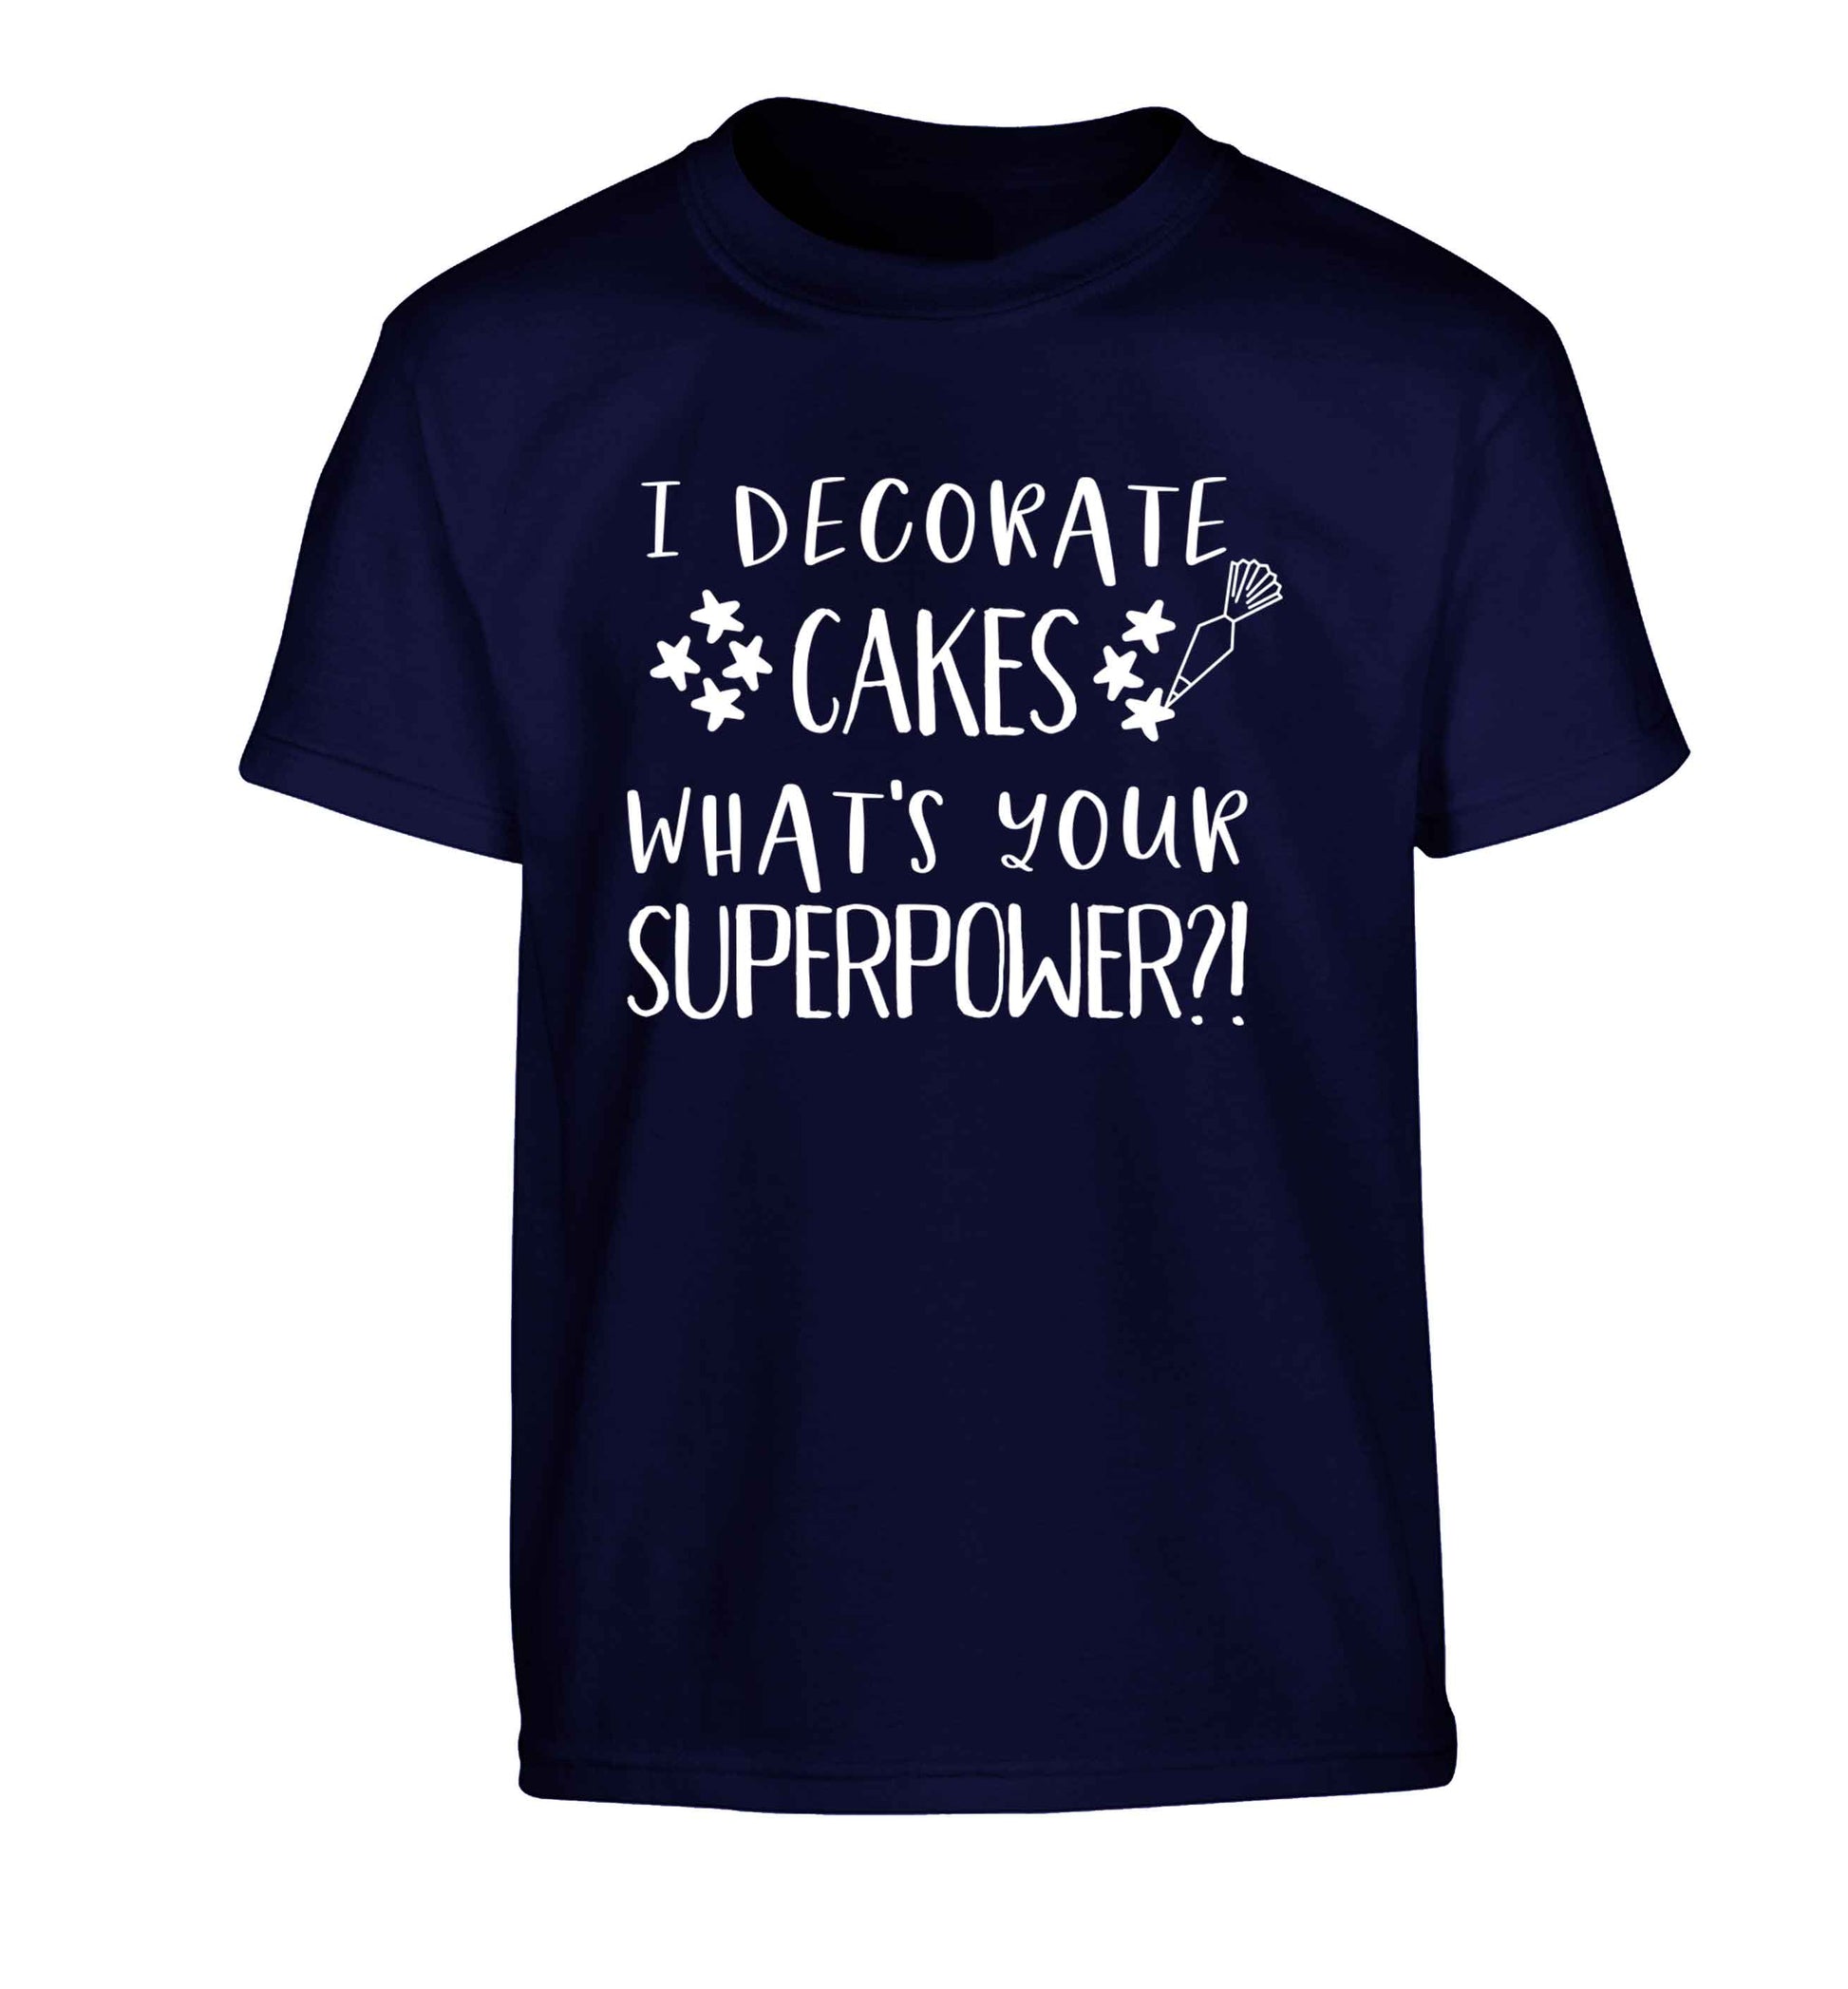 I decorate cakes what's your superpower?! Children's navy Tshirt 12-13 Years